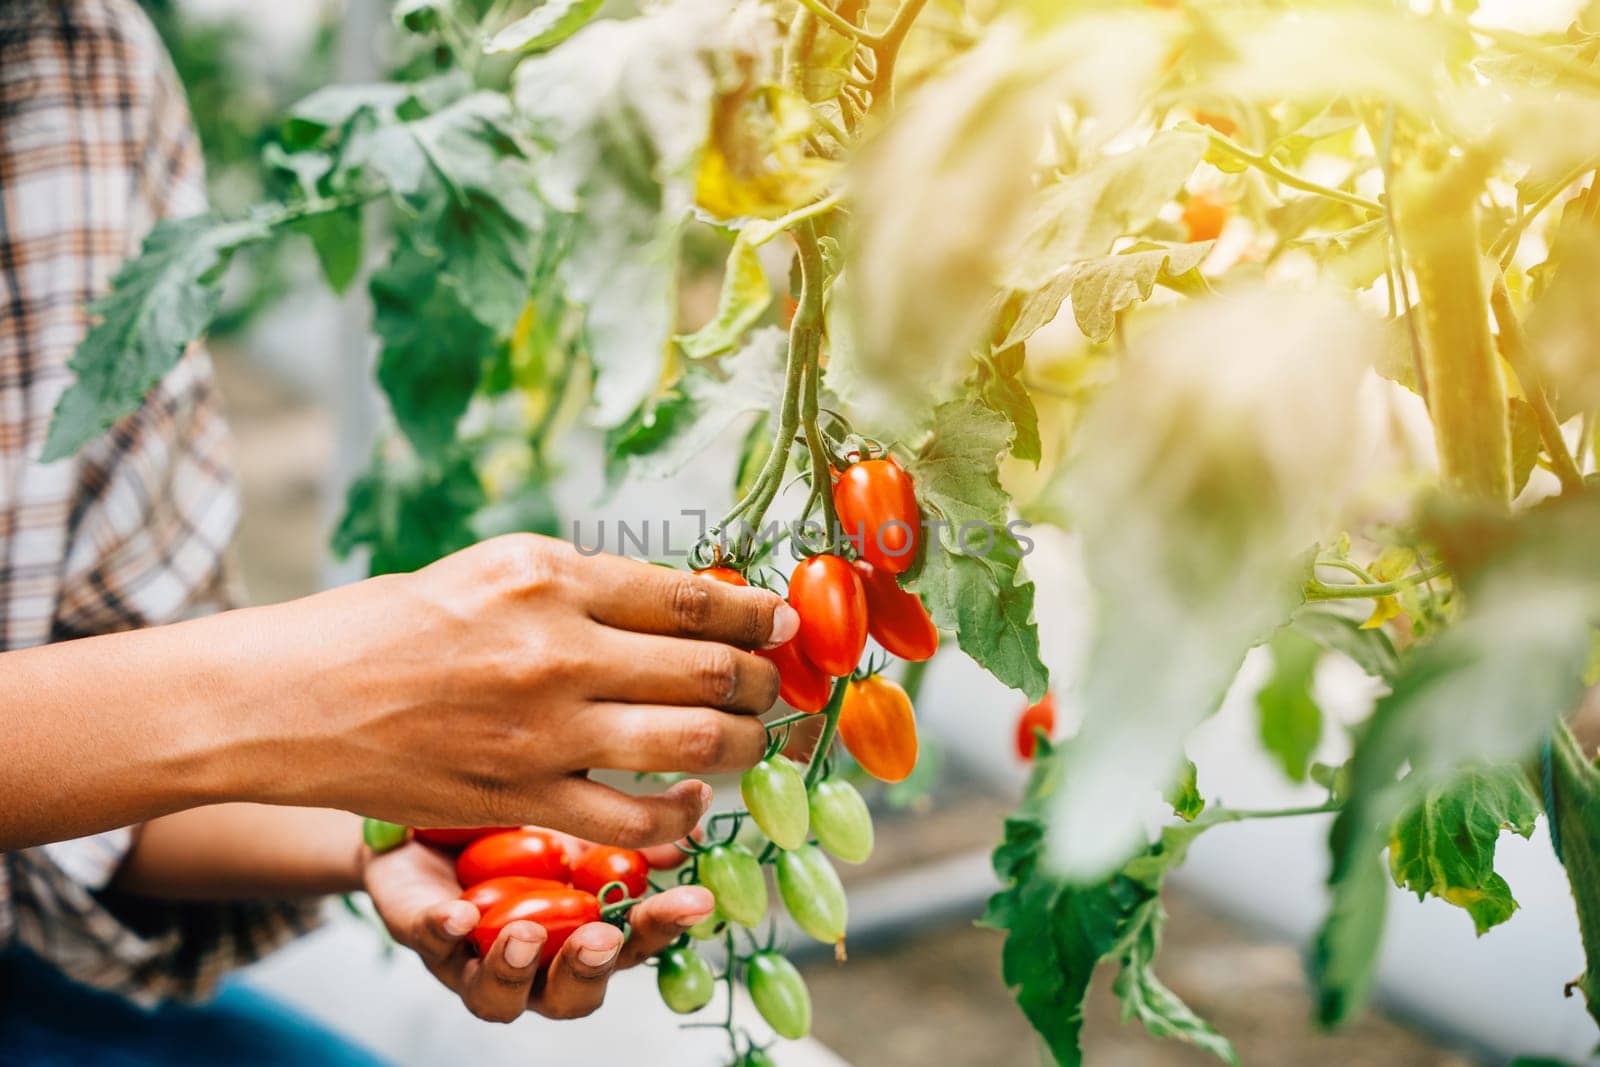 Close-up of farmer's hands in a greenhouse cherishing cherry tomatoes. Quality harvest signifies meticulous growth care. Nature's vivid outdoors portray bountiful freshness.